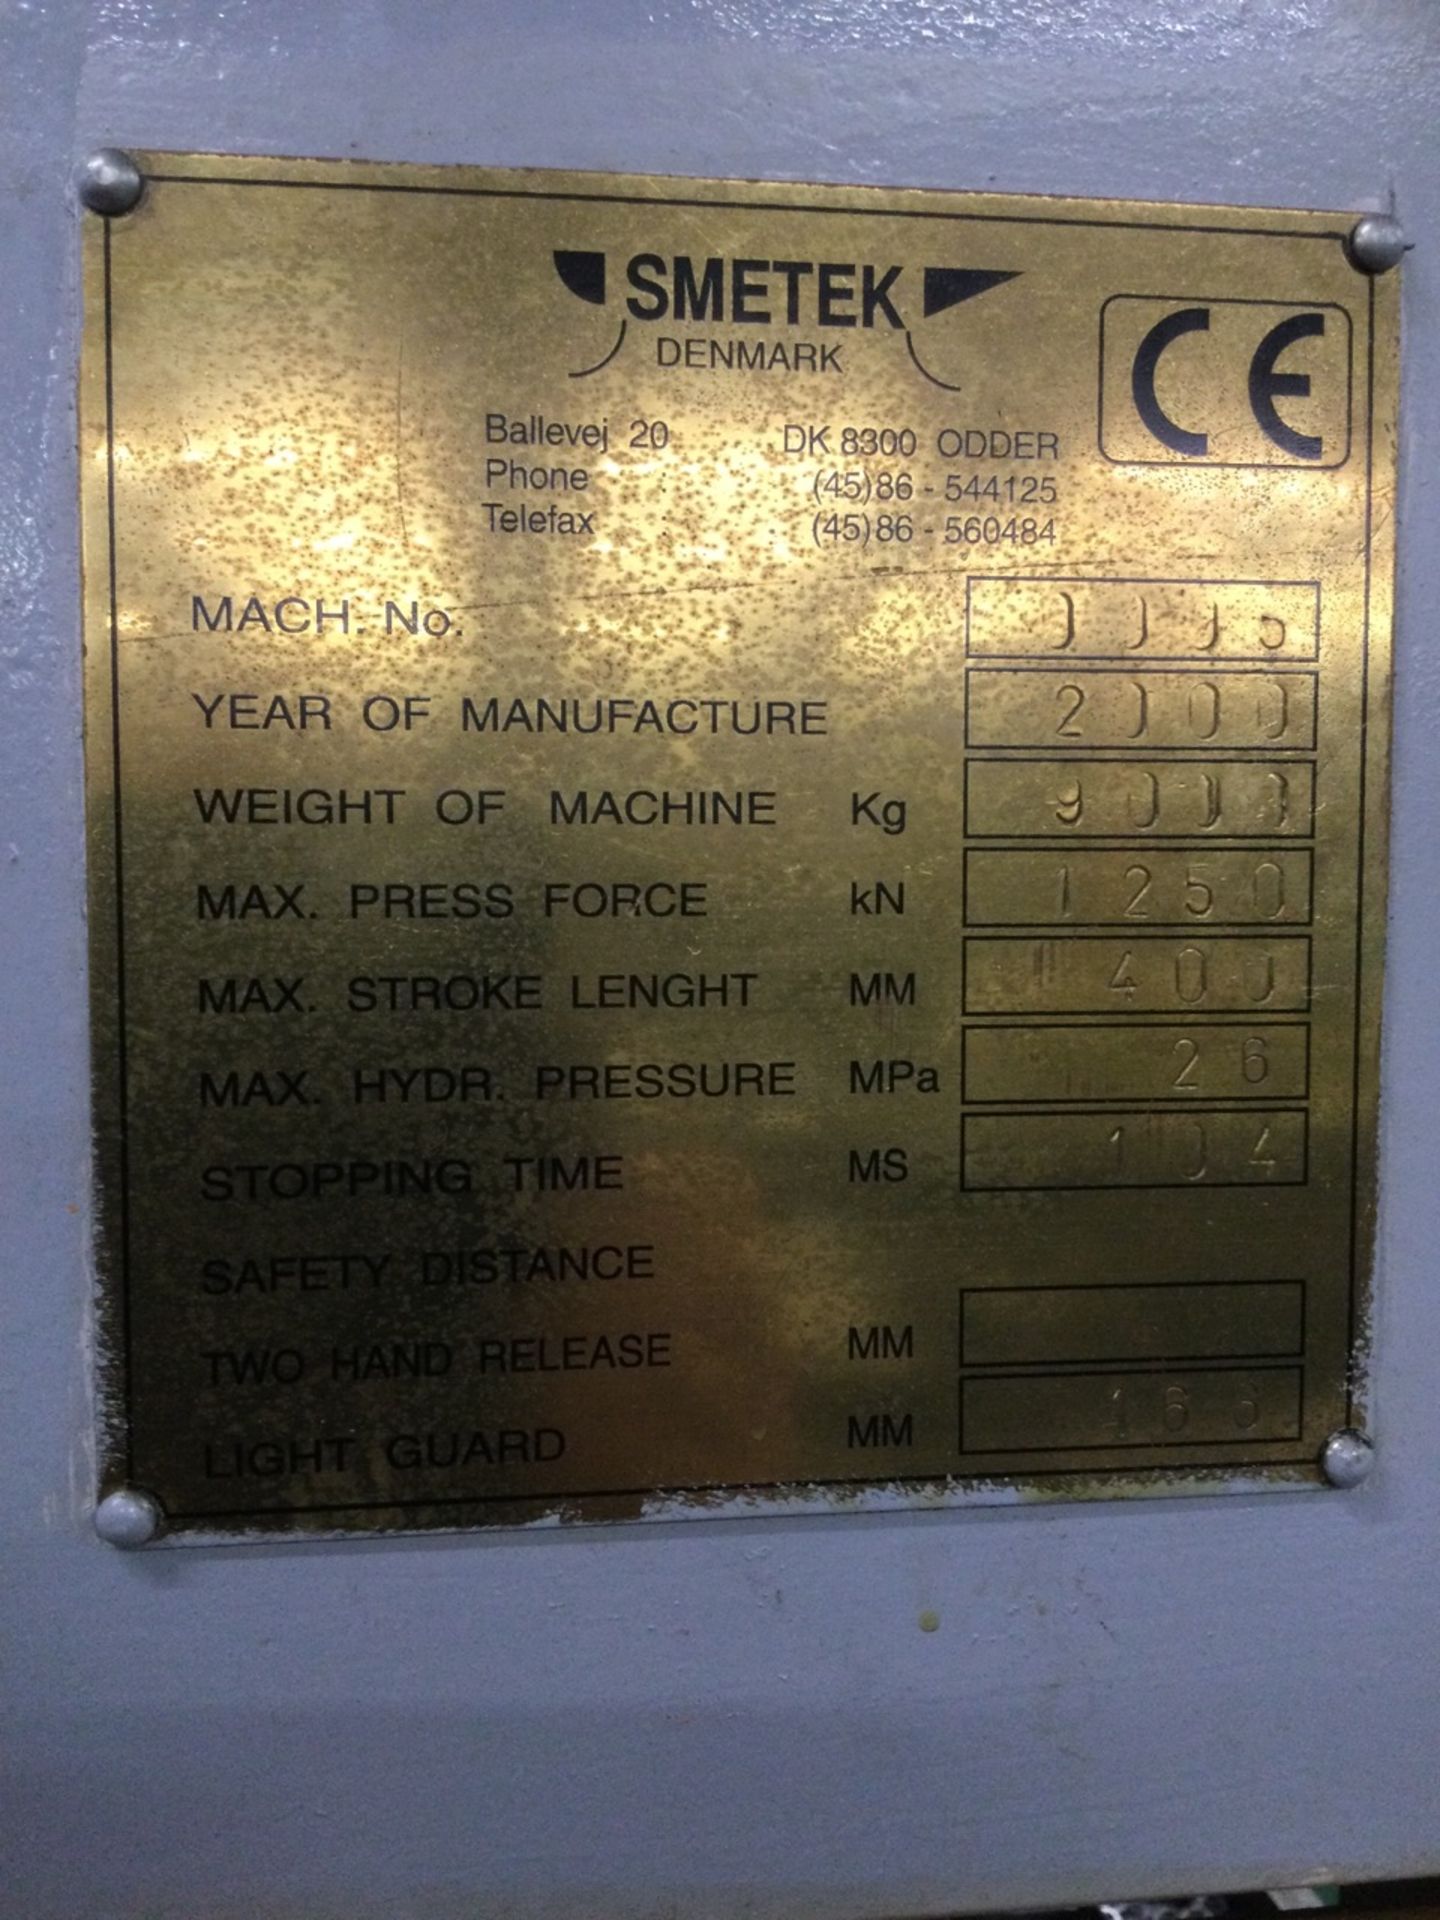 1 Smetek, 125-ton hydraulic power press, bed size 1000x600mm , Serial Number: 0005, Year of Manufact - Image 3 of 4